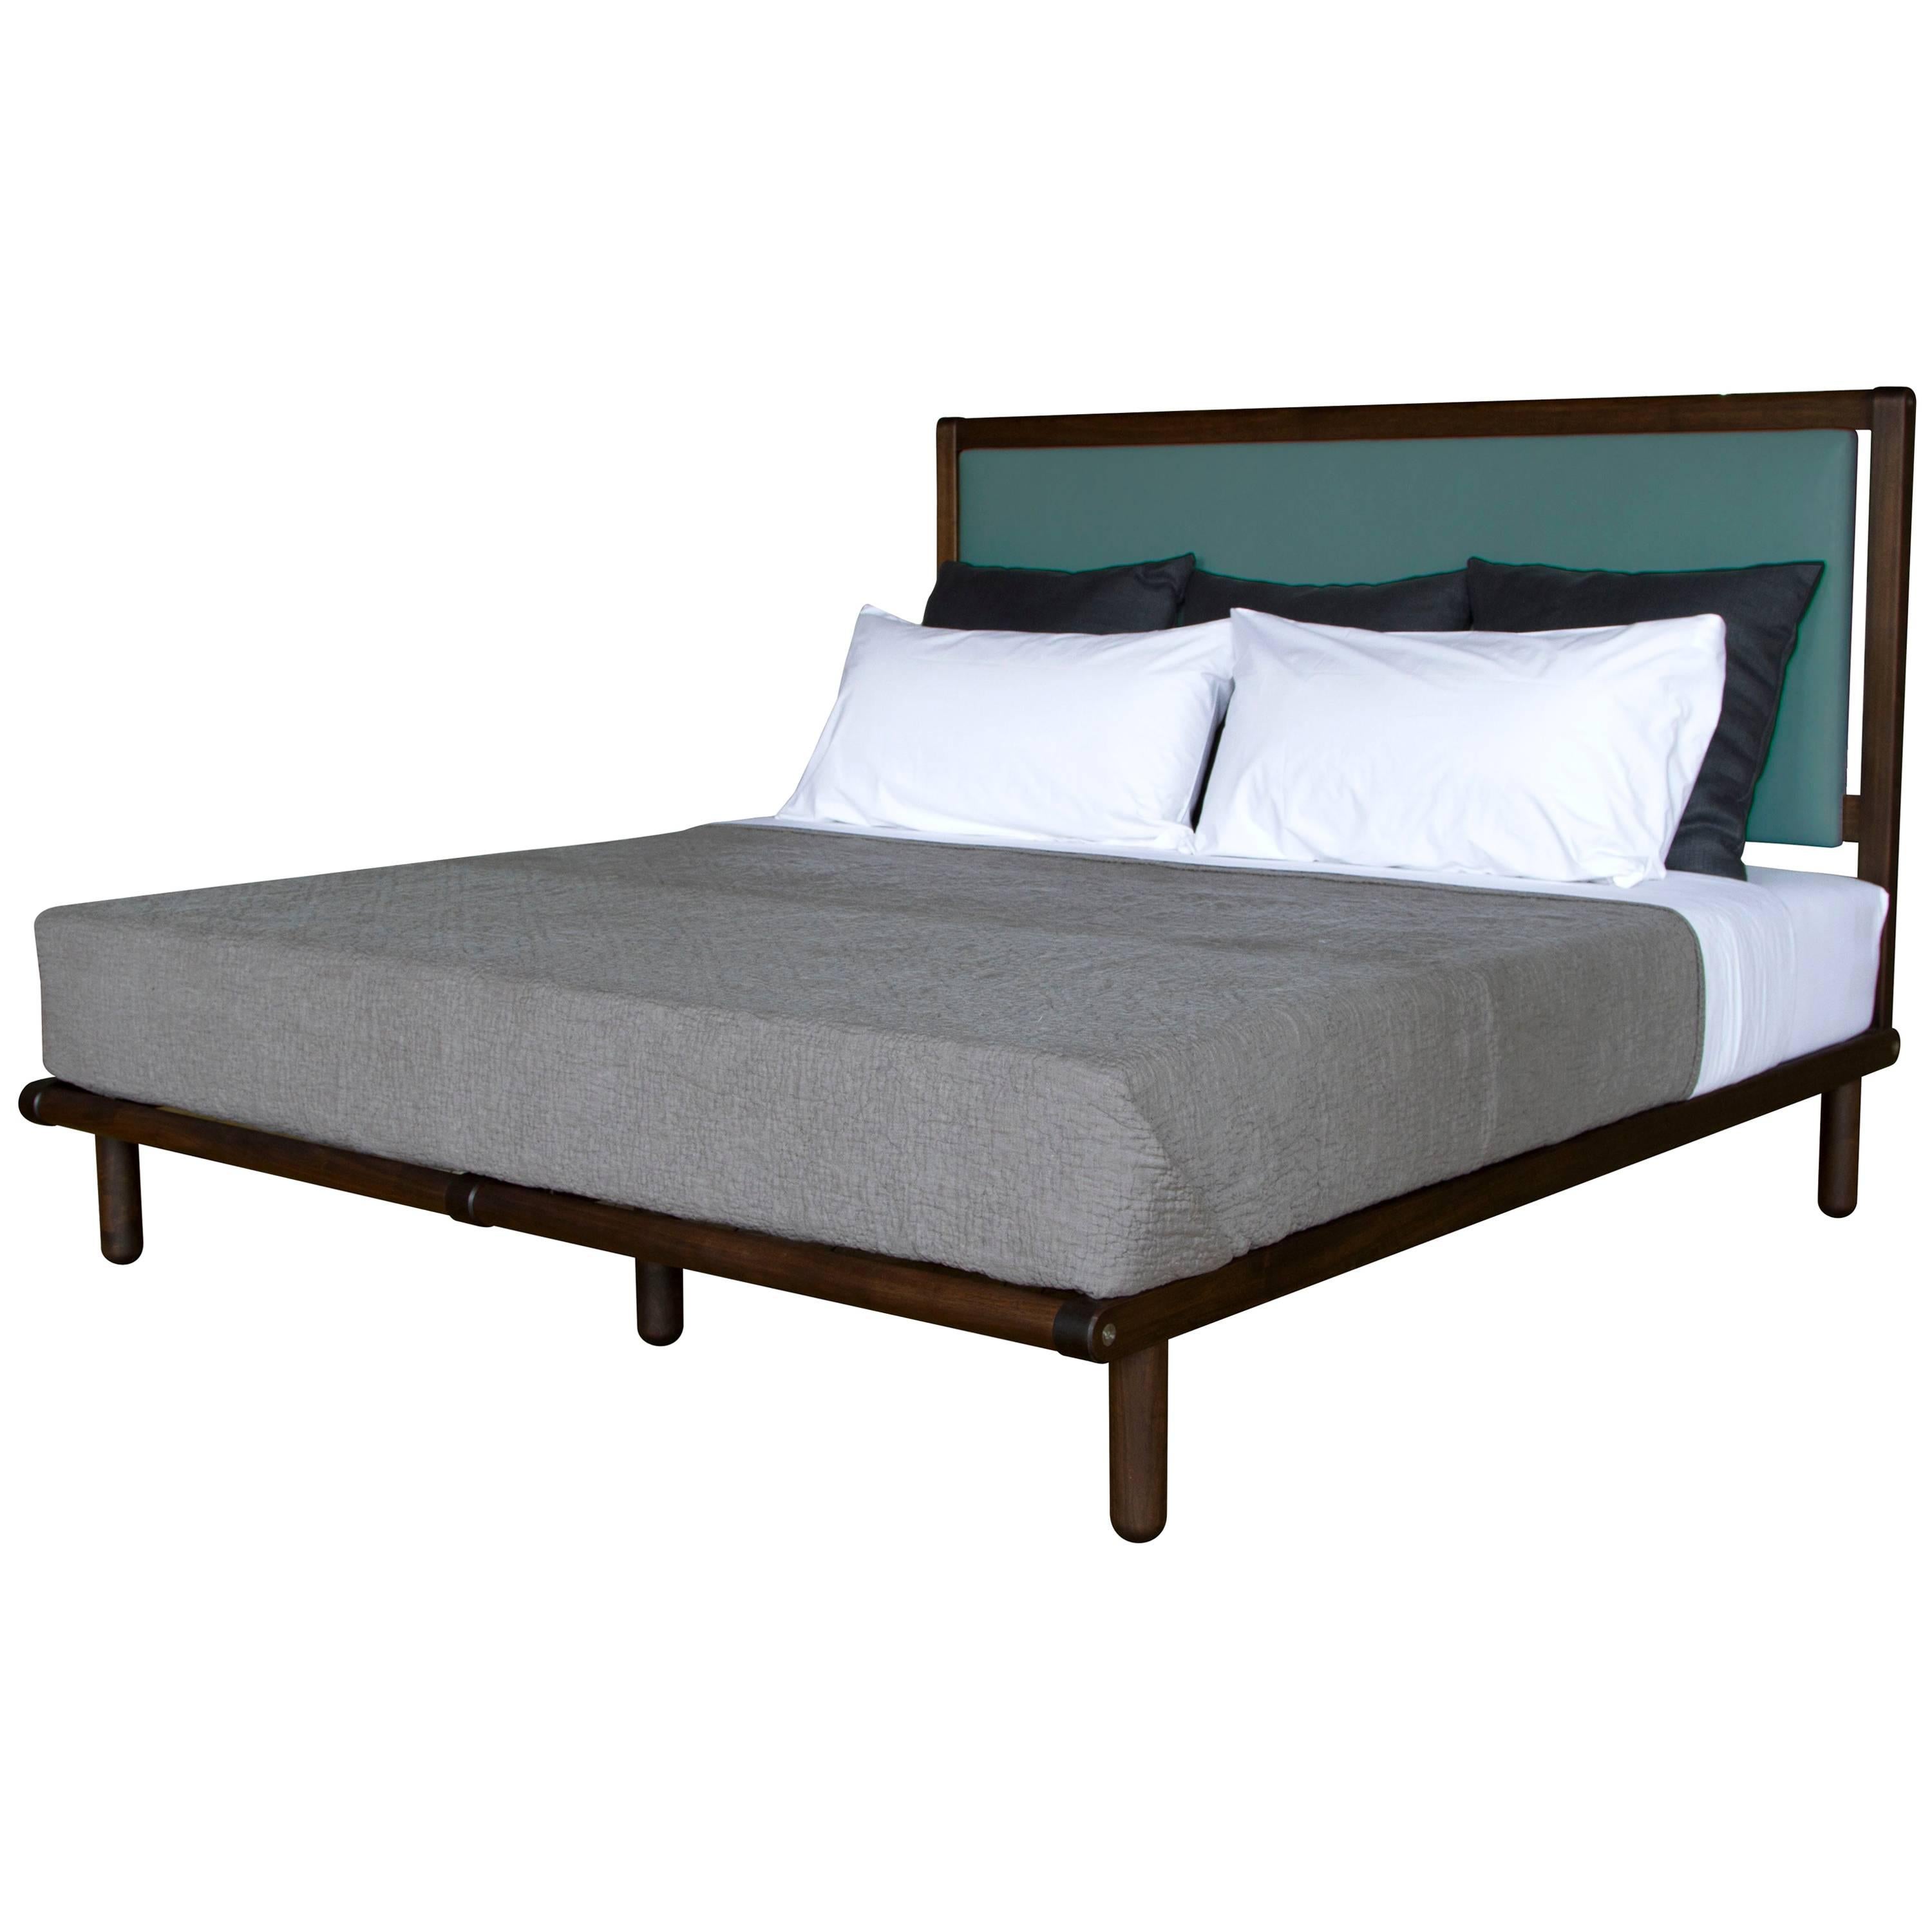 Isaksen Bed in Walnut and Leather - handcrafted by Richard Wrightman Design